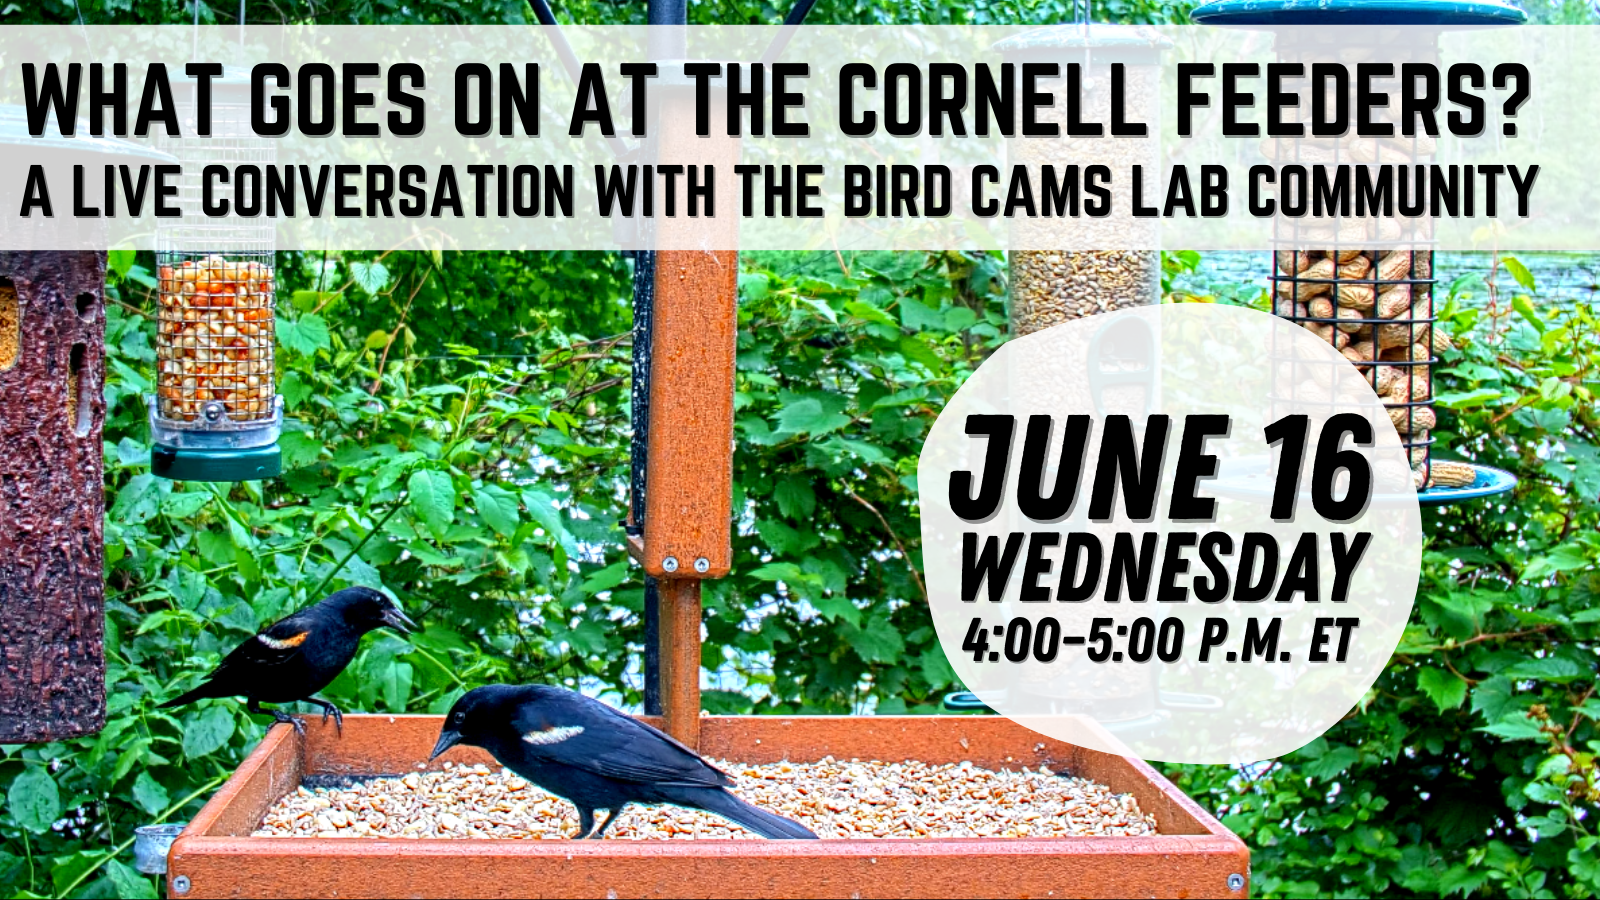 Two red-winged blackbirds feeding on a feeding table filled with bird seed. They are surrounded by hanging feeders against a leafy green background. Over the image is text on a white semi-transparent background that reads, "What goes on at the Cornell feeders? A Live conversation with the Bird Cams Lab community. June 16 Wednesday 4:00-5:00 P.M. ET."